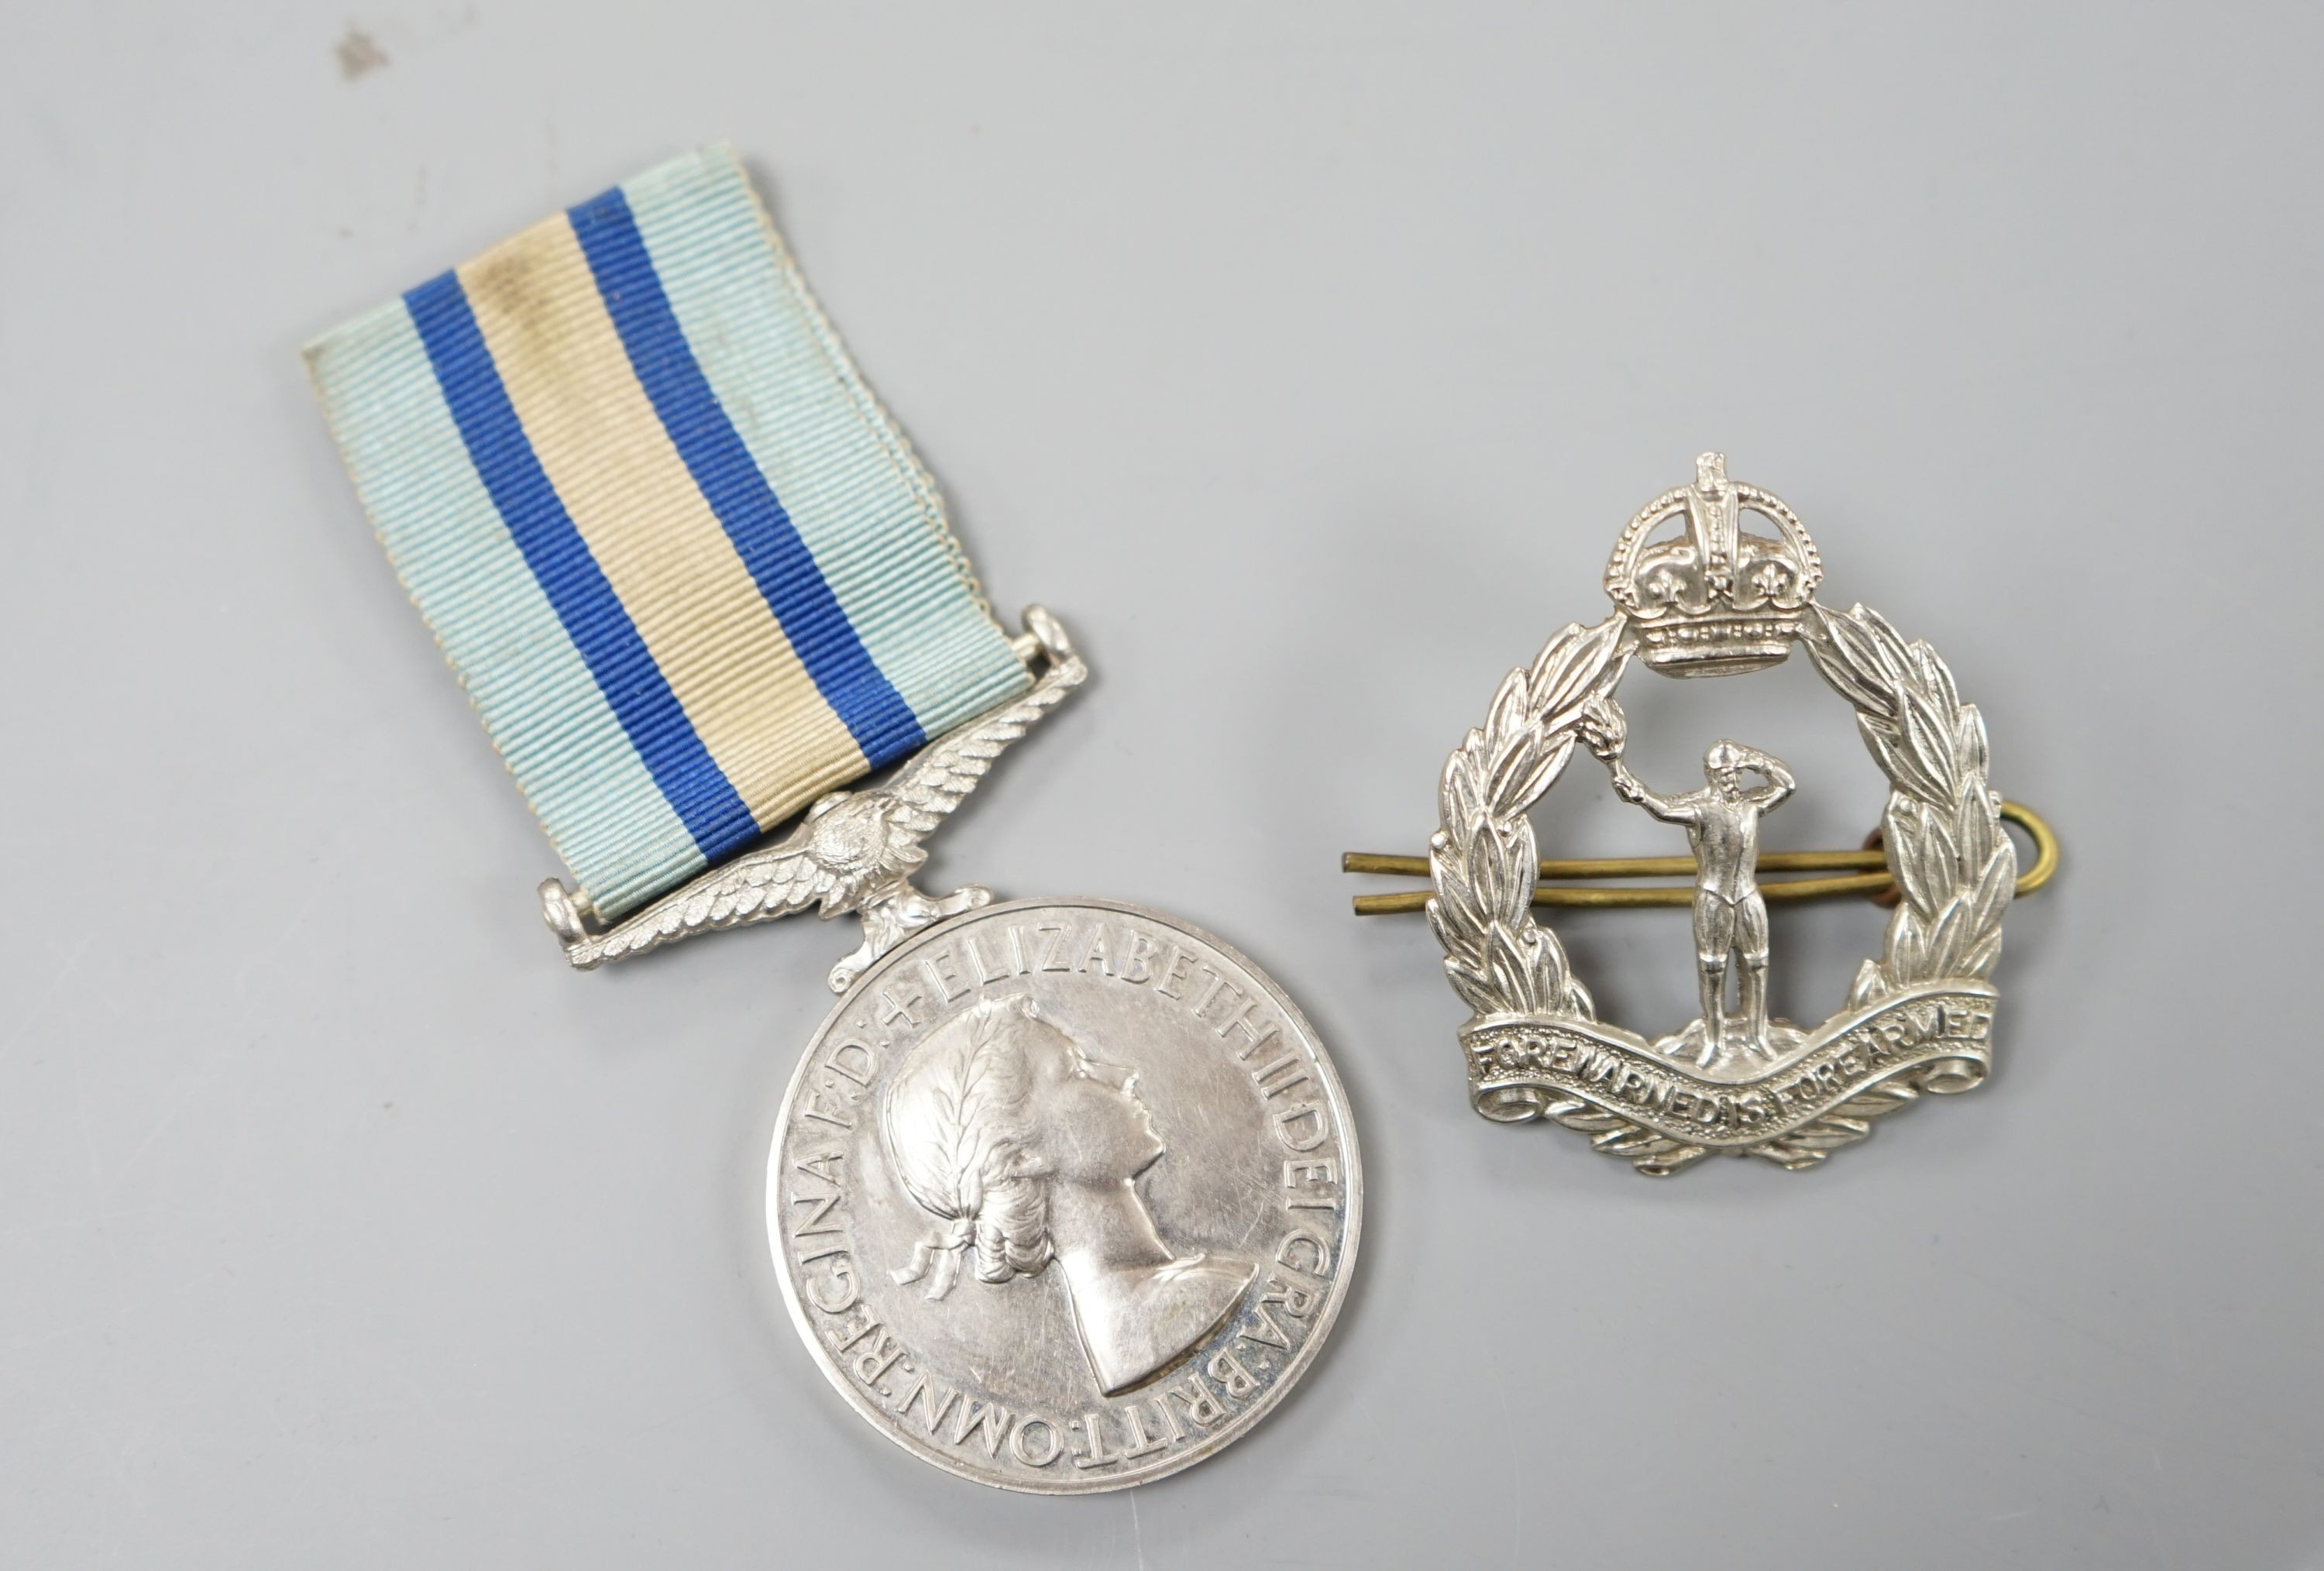 A QEII Royal Observer Corps Medal to 'CHIEF OBSERVER J. OSBORNE’ and a cap badge